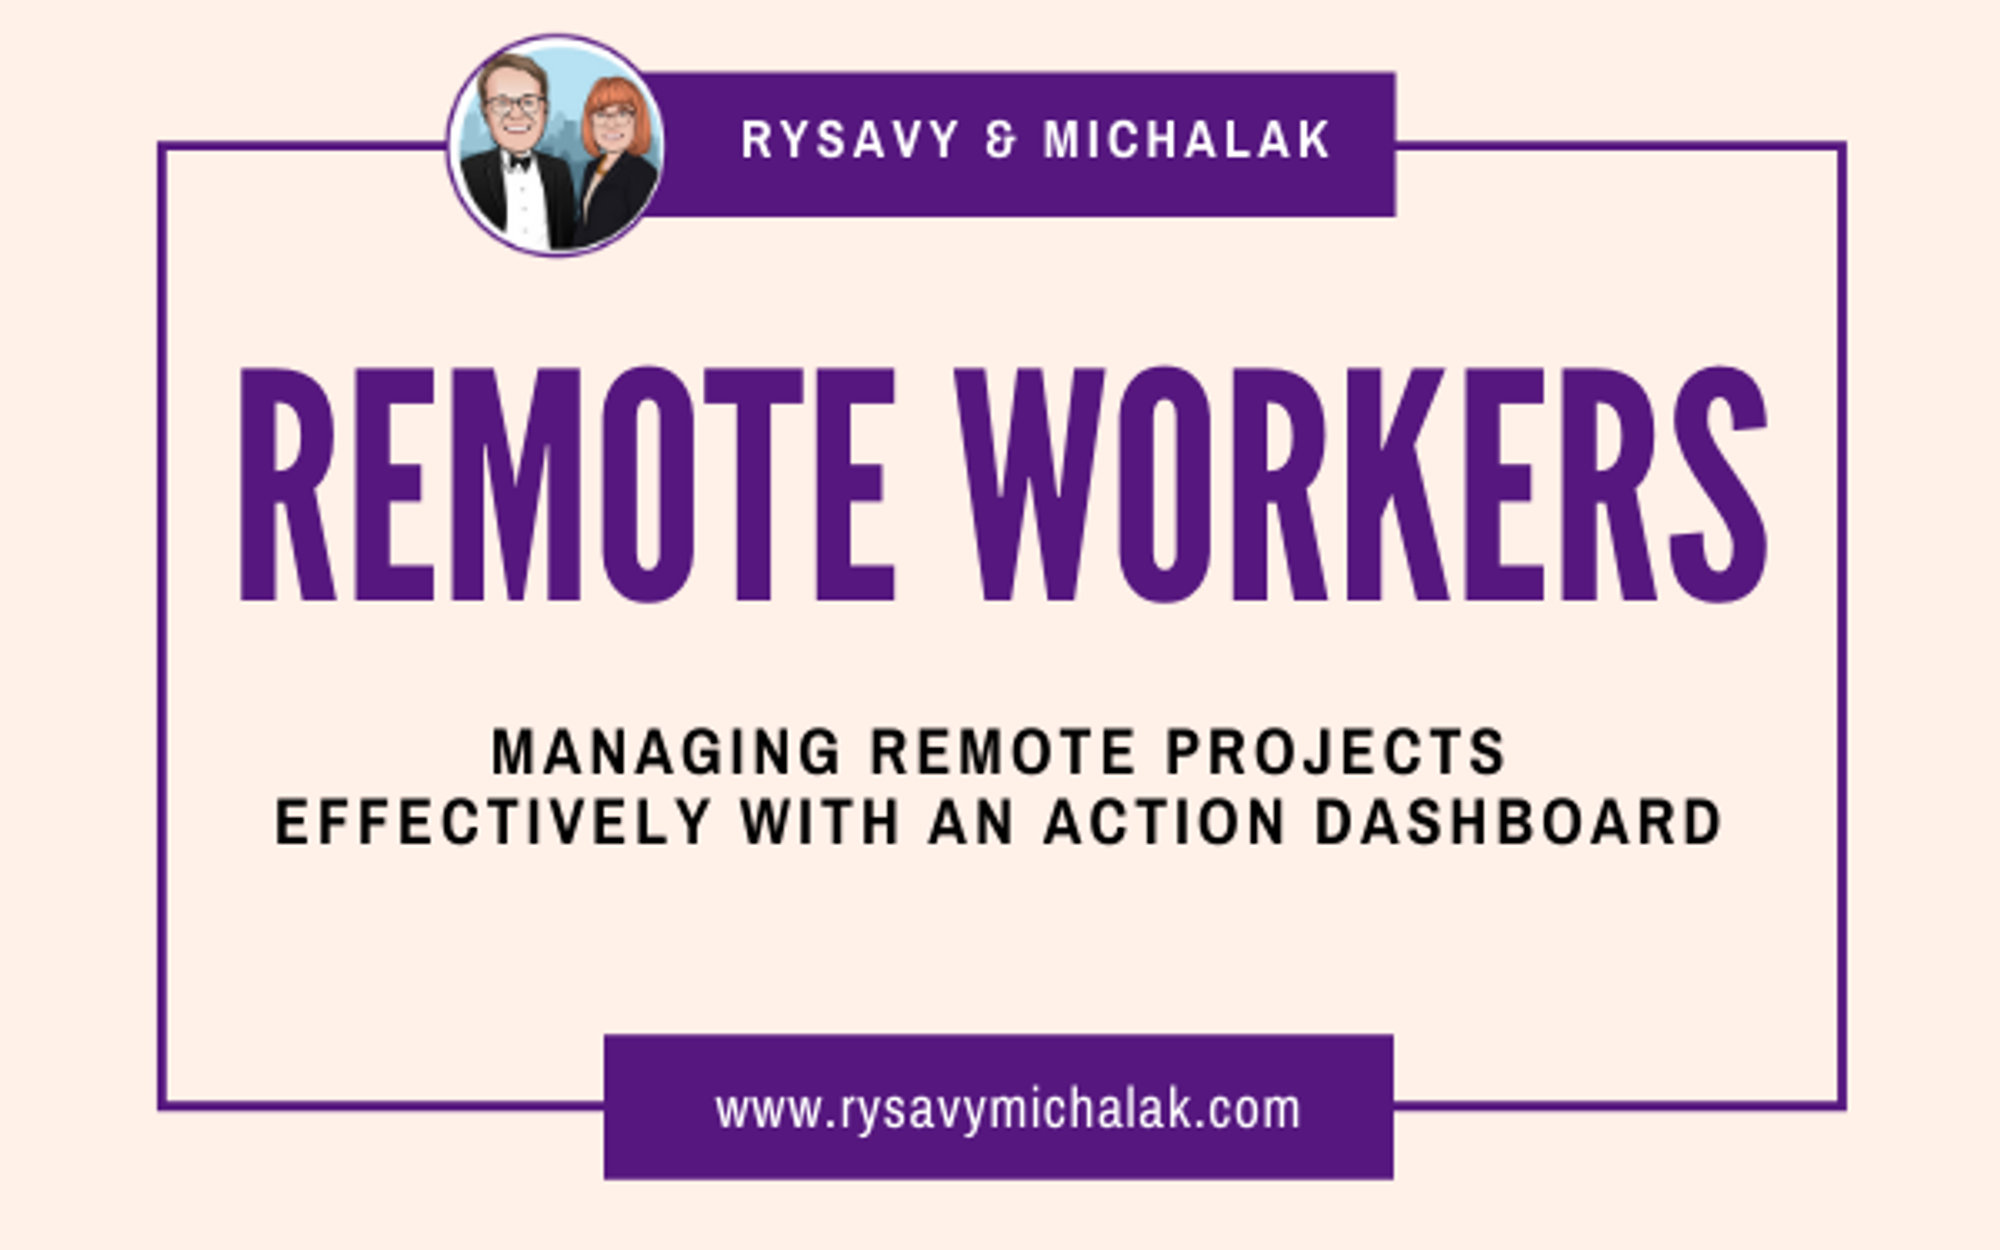 Managing Remote Projects Effectively with an Action Dashboard